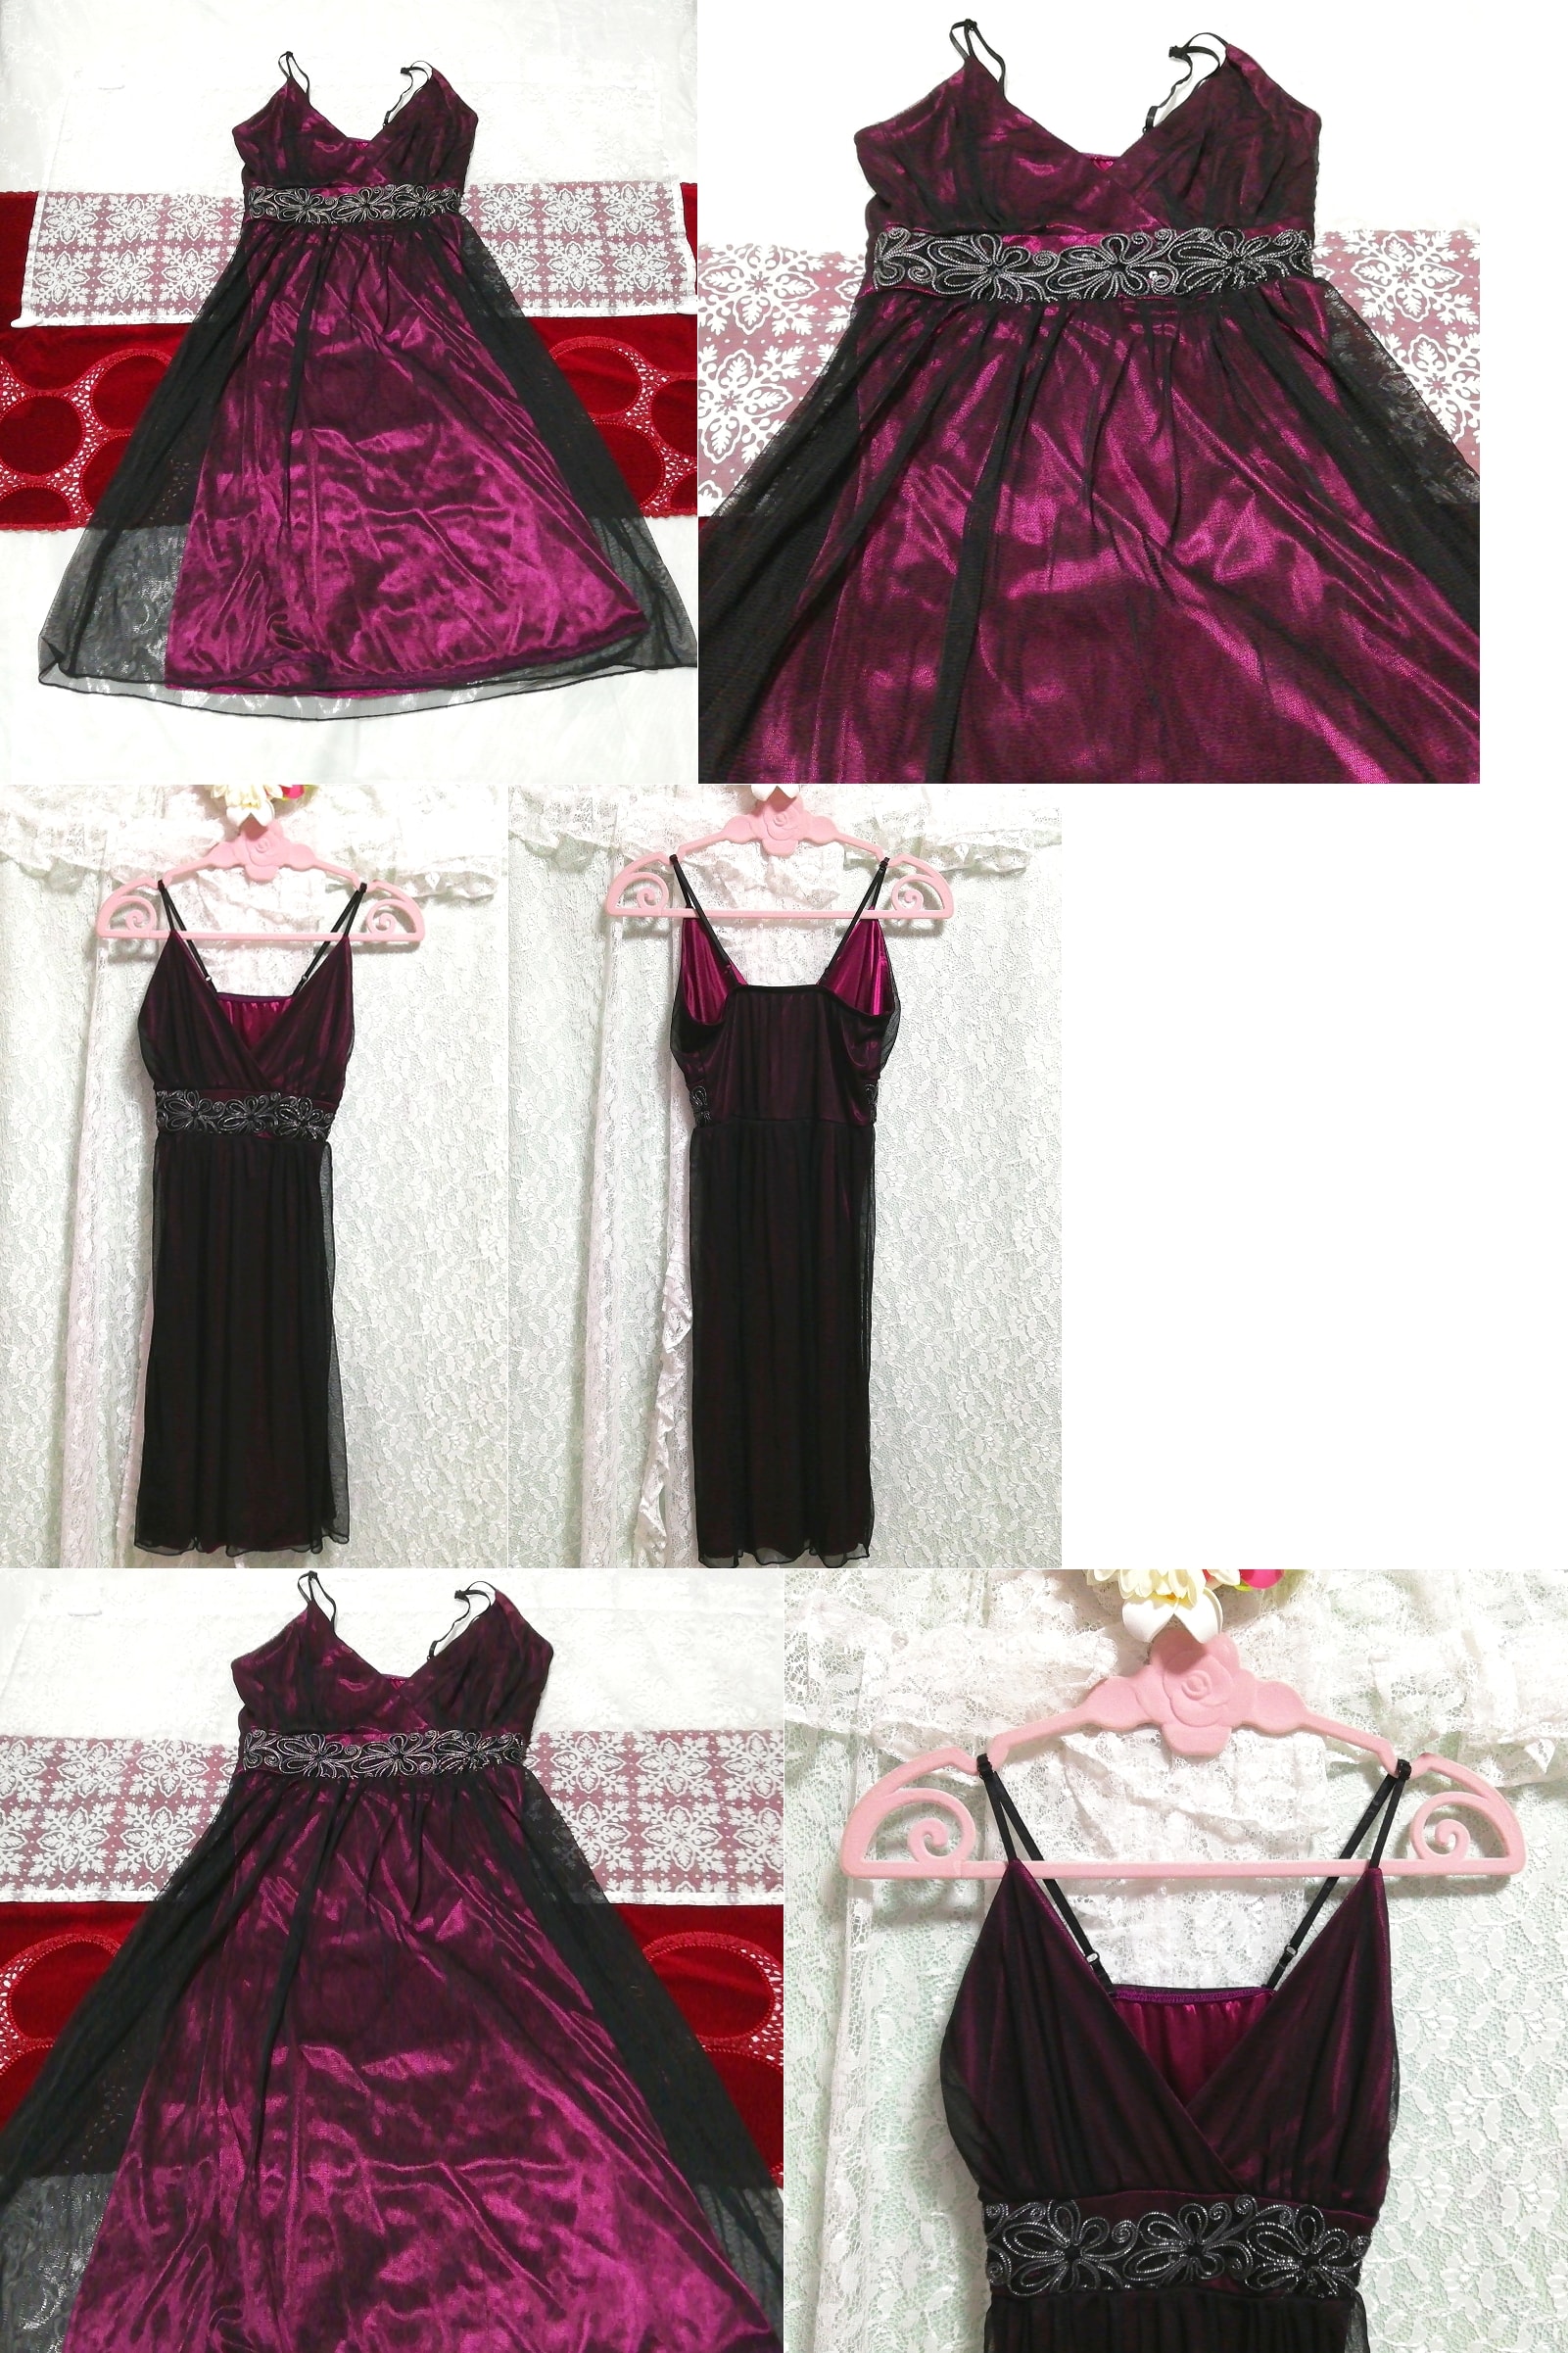 Purple black satin lace negligee nightgown camisole dress babydoll dress, knee length skirt, m size